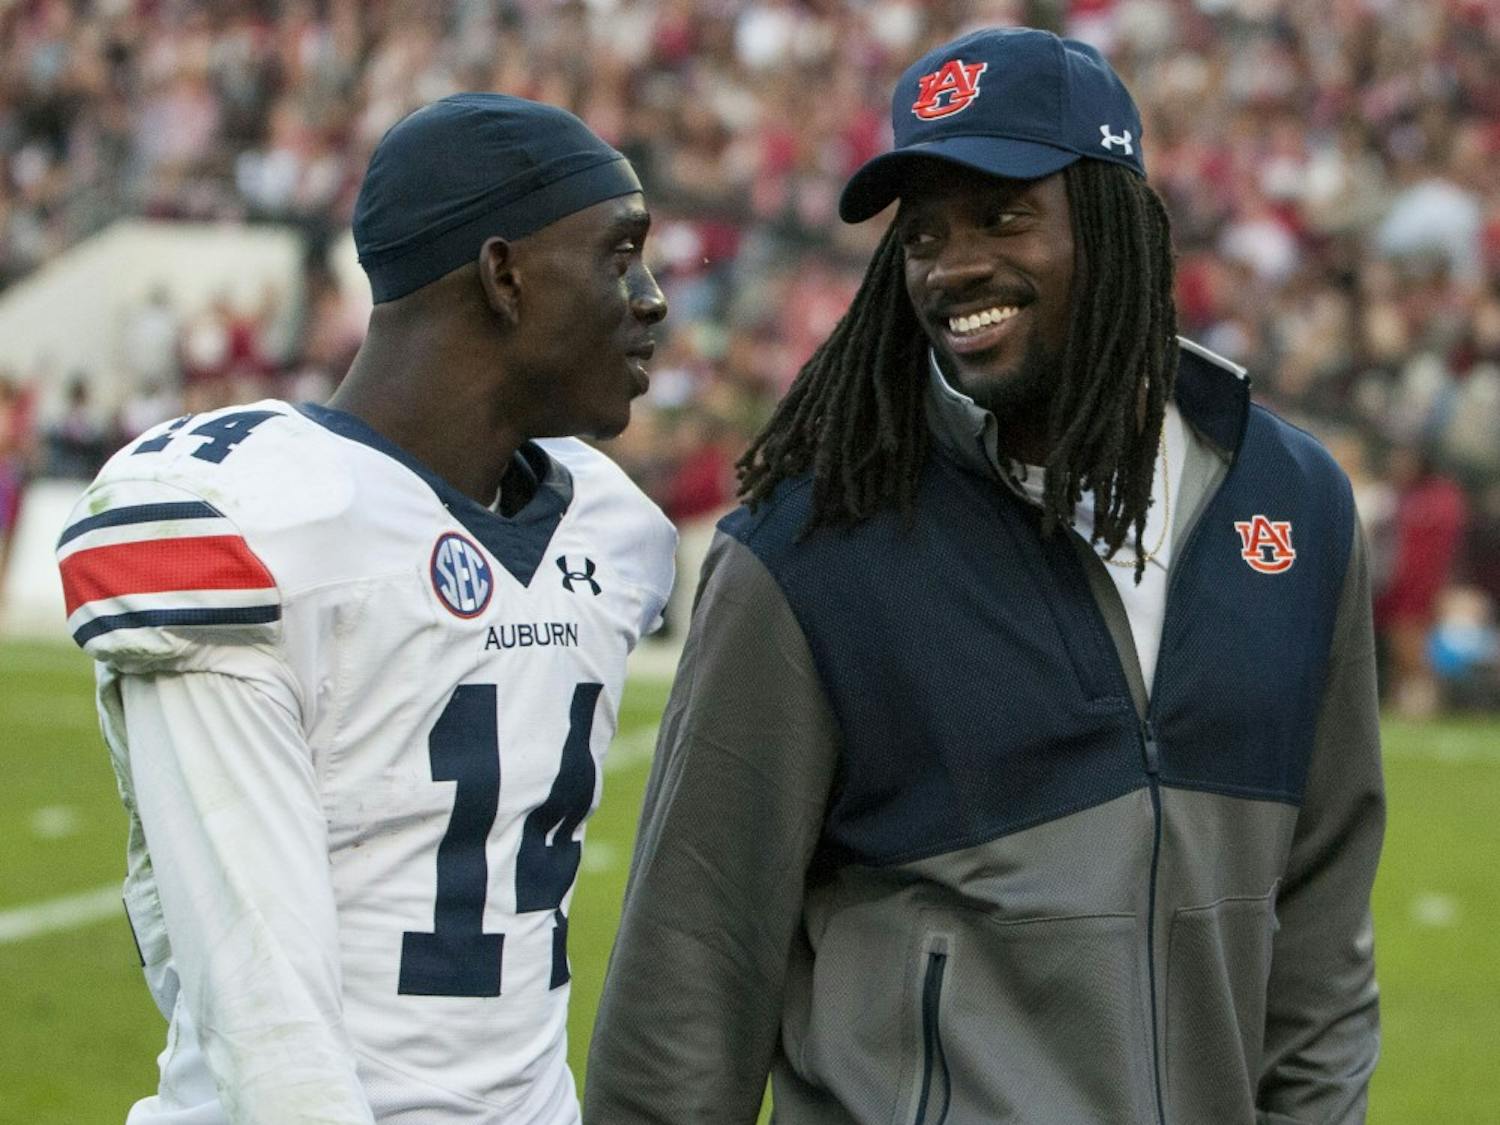 Former Auburn player Sammie Coates (right) and Auburn safety Stephen Roberts (14) have a chat as the Tigers head to the locker room at halftime. Auburn vs Alabama on Saturday, Nov. 26 in Tuscaloosa, AL.